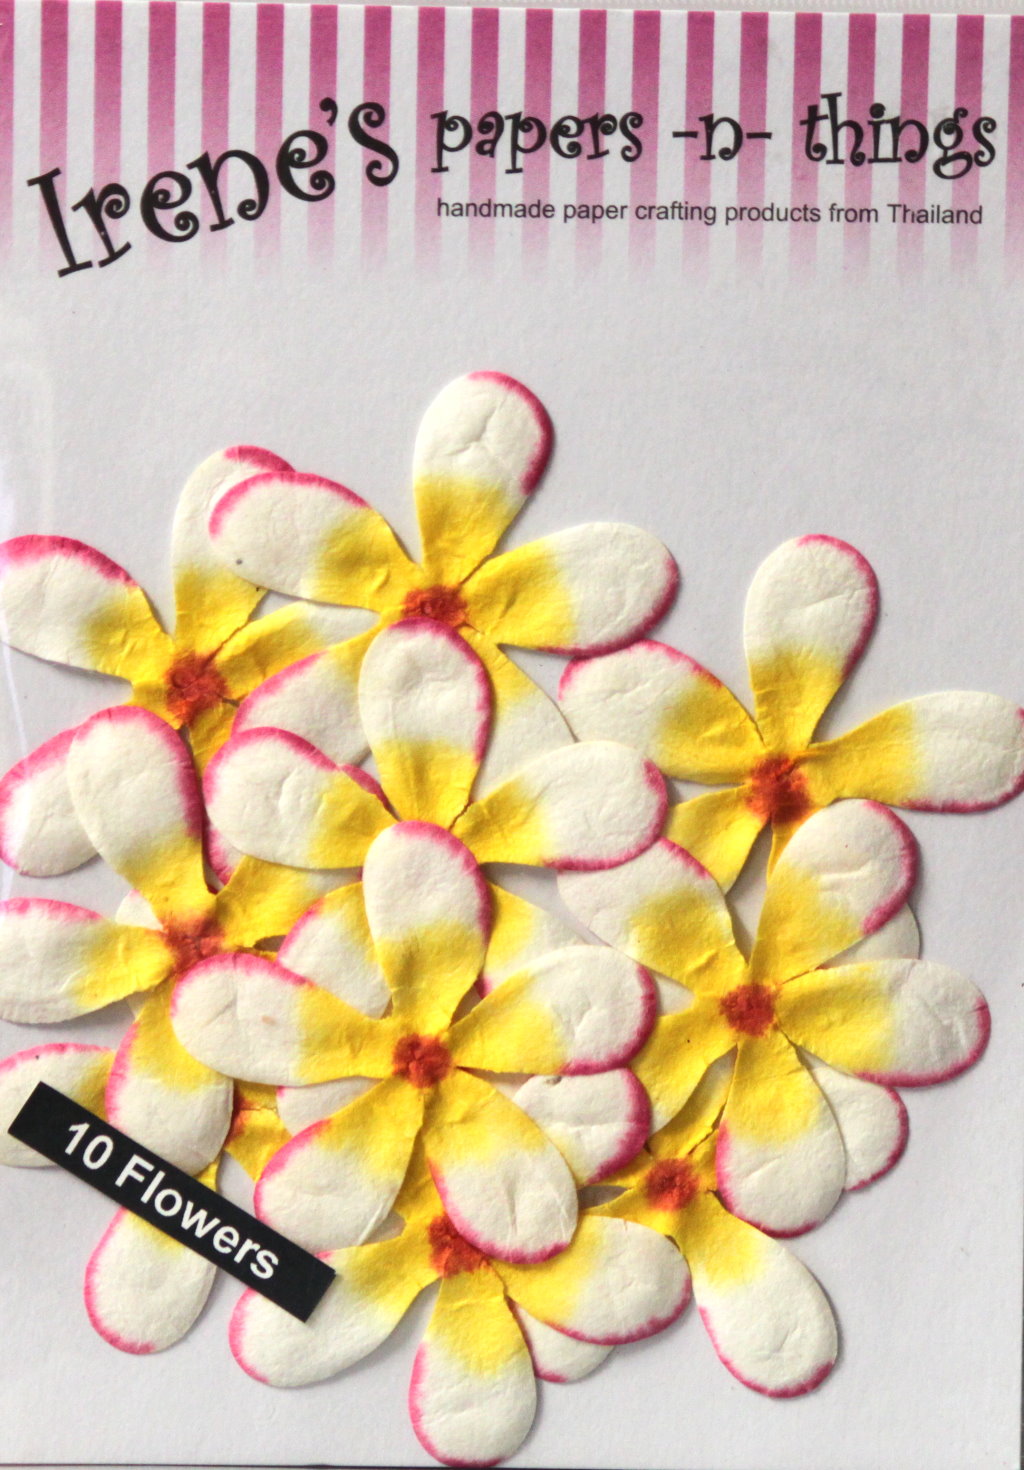 Irene's Papers-N-Things Handmade Yellow Mulberry Paper Flowers